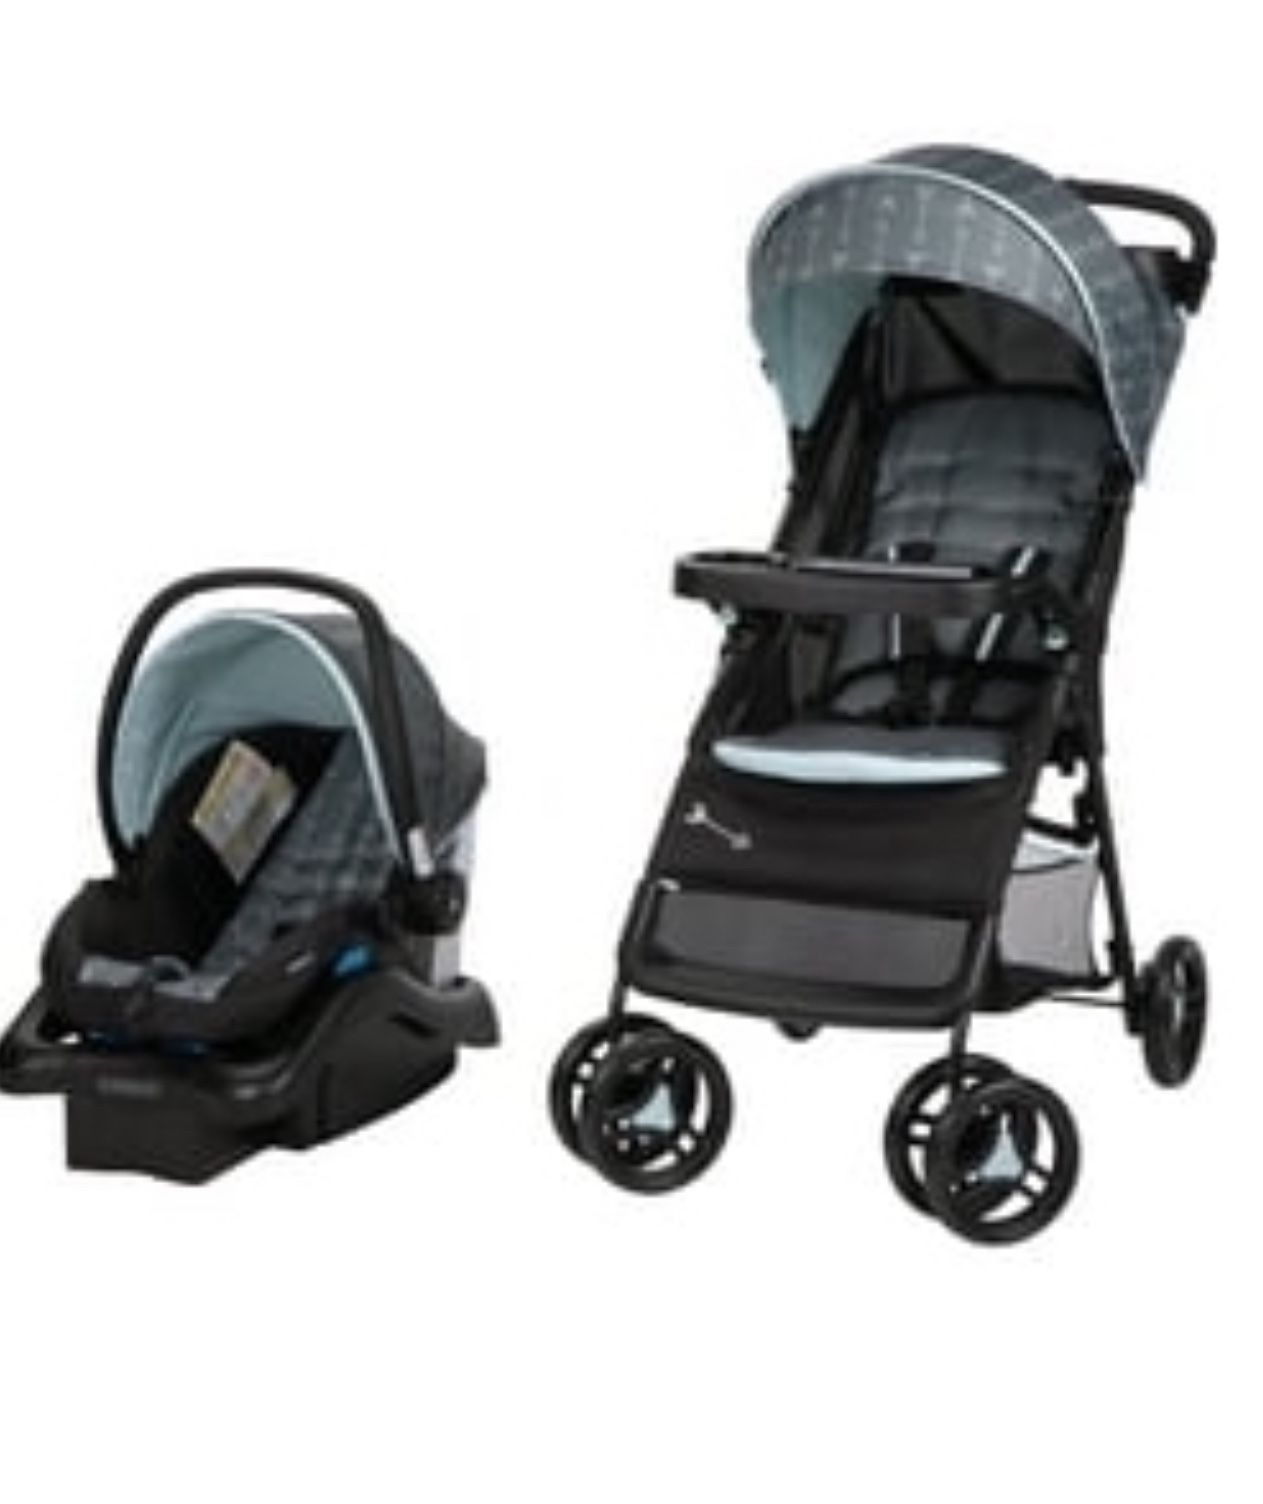 $100 Car Seat And Stroller Combo